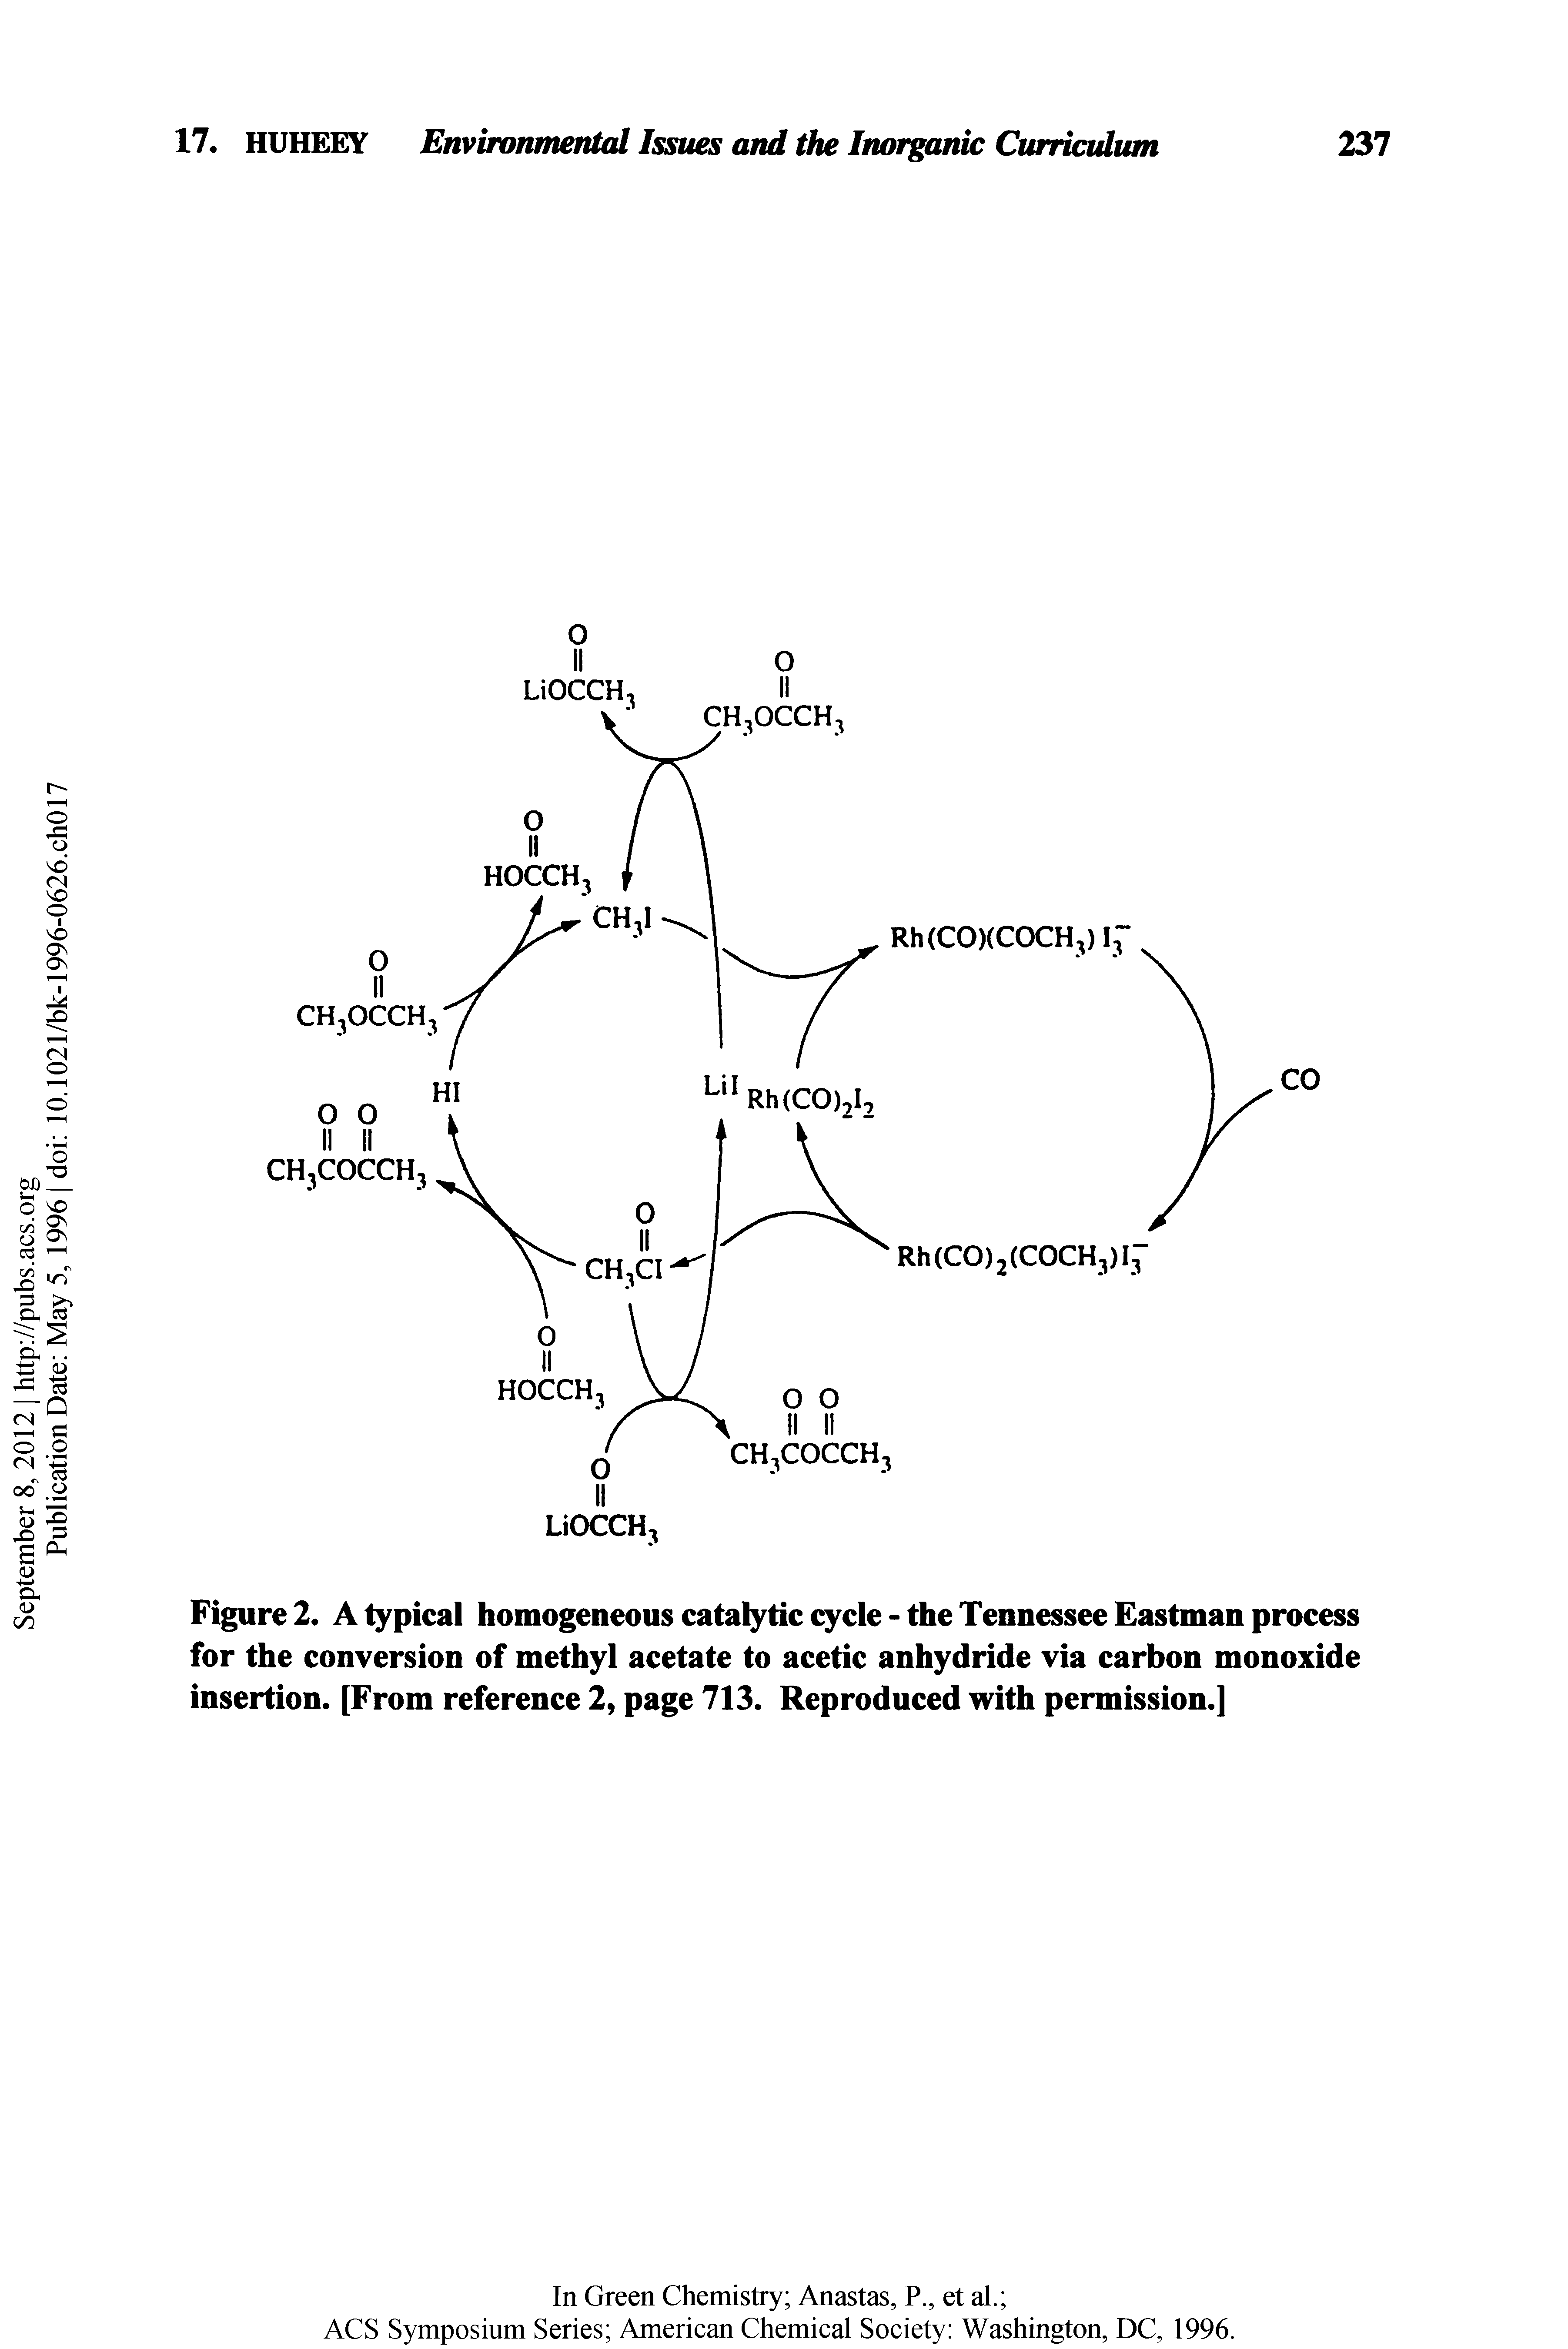 Figure 2. A typical homogeneous catalytic cycle - the Tennessee Eastman process for the conversion of methyl acetate to acetic anhydride via carbon monoxide insertion. [From reference 2, page 713. Reproduced with permission.]...